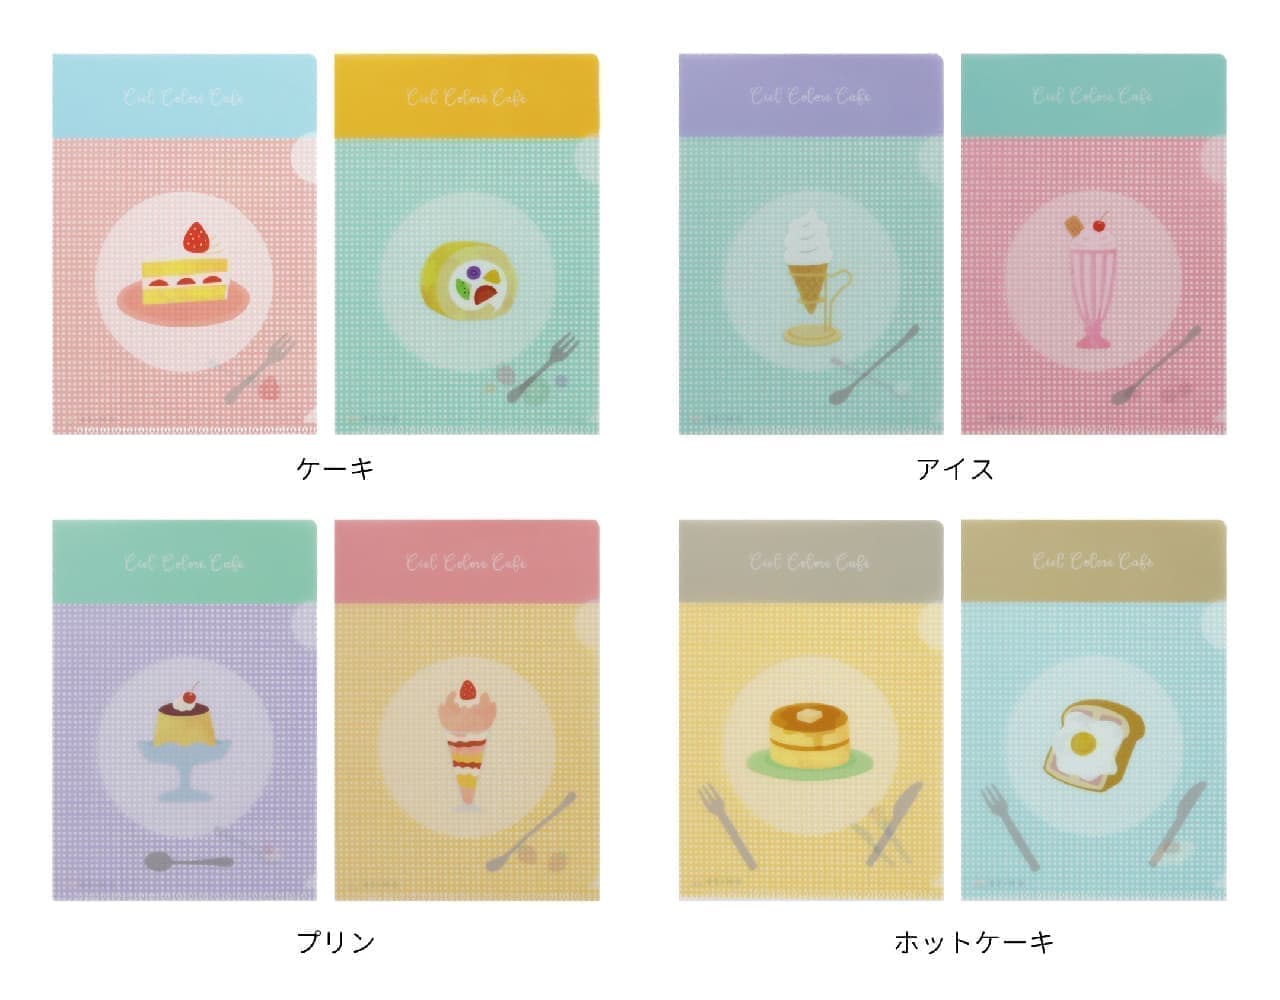 Summary of cute miscellaneous goods with cafe menu pattern